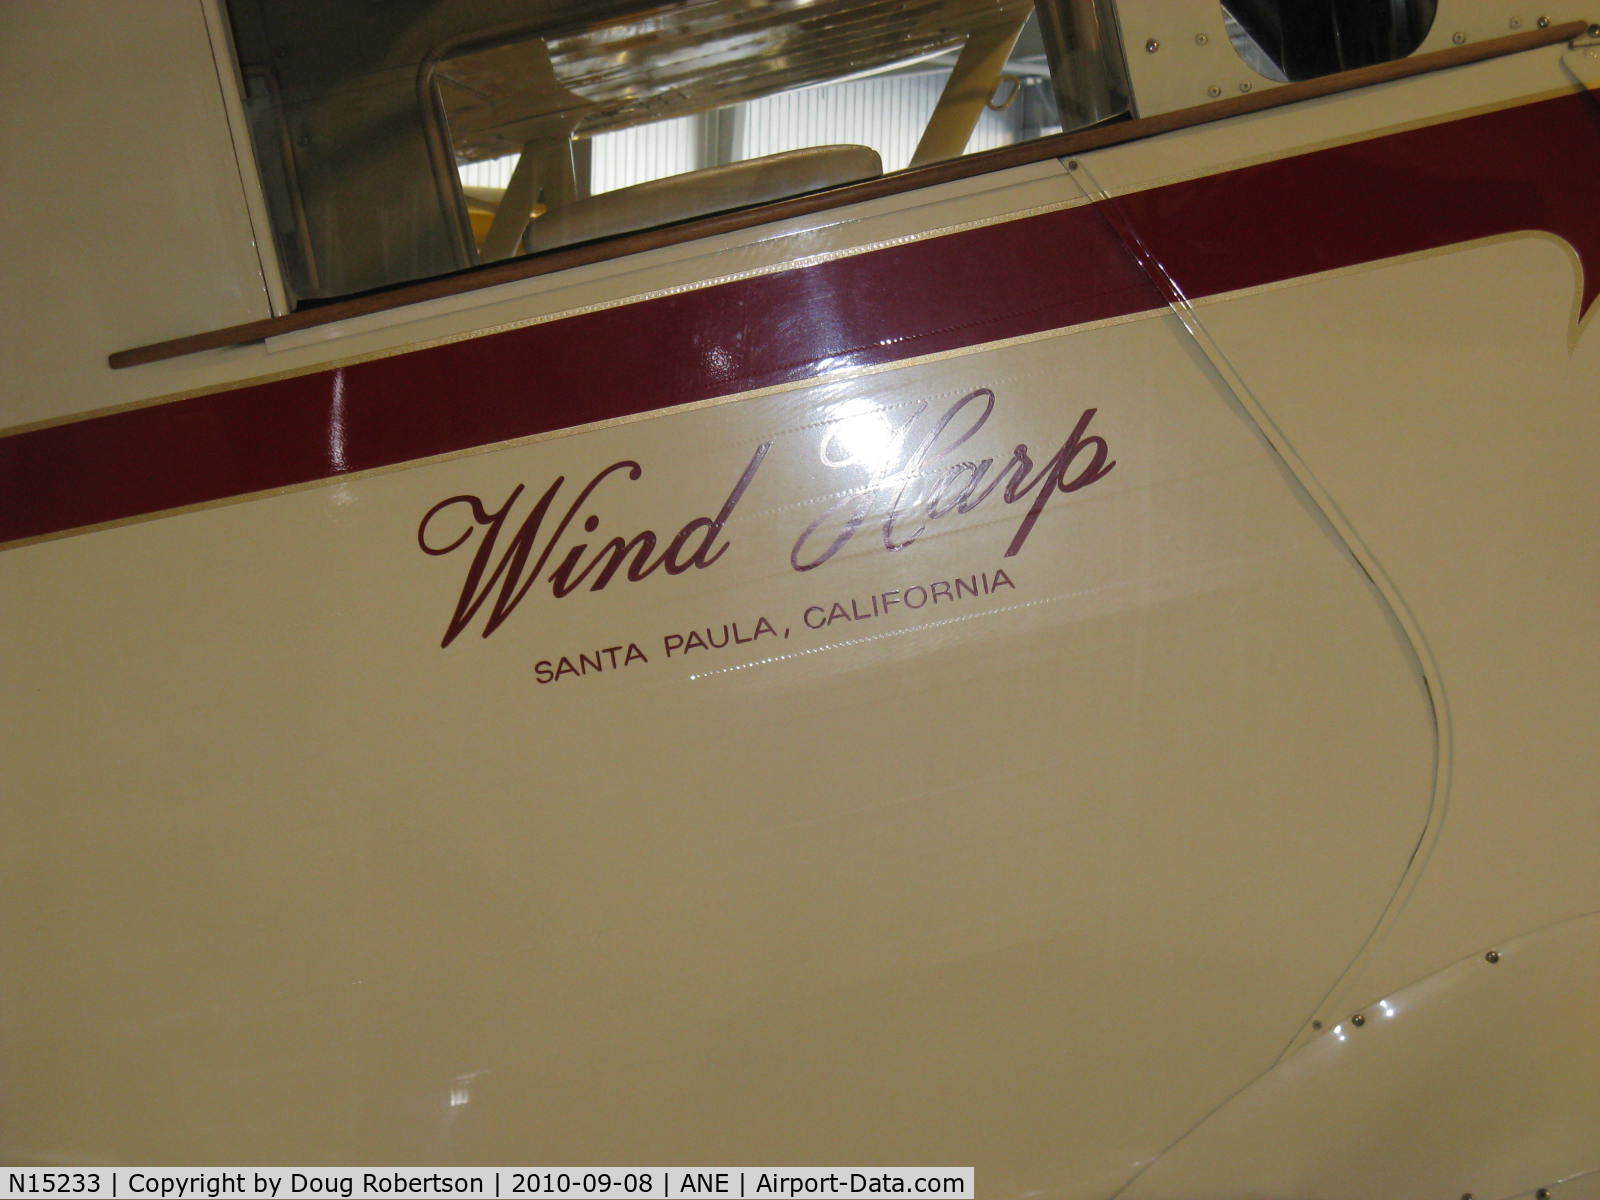 N15233, 1935 Waco CUC-1 C/N 4318, 1935 Waco CUC-1 'Wind Harp', loss of this aircraft & 'Miss Santa Paula', another Waco cabin biplane to this museum led to formation of the Aviation Museum of Santa Paula. At Golden Wings Museum.